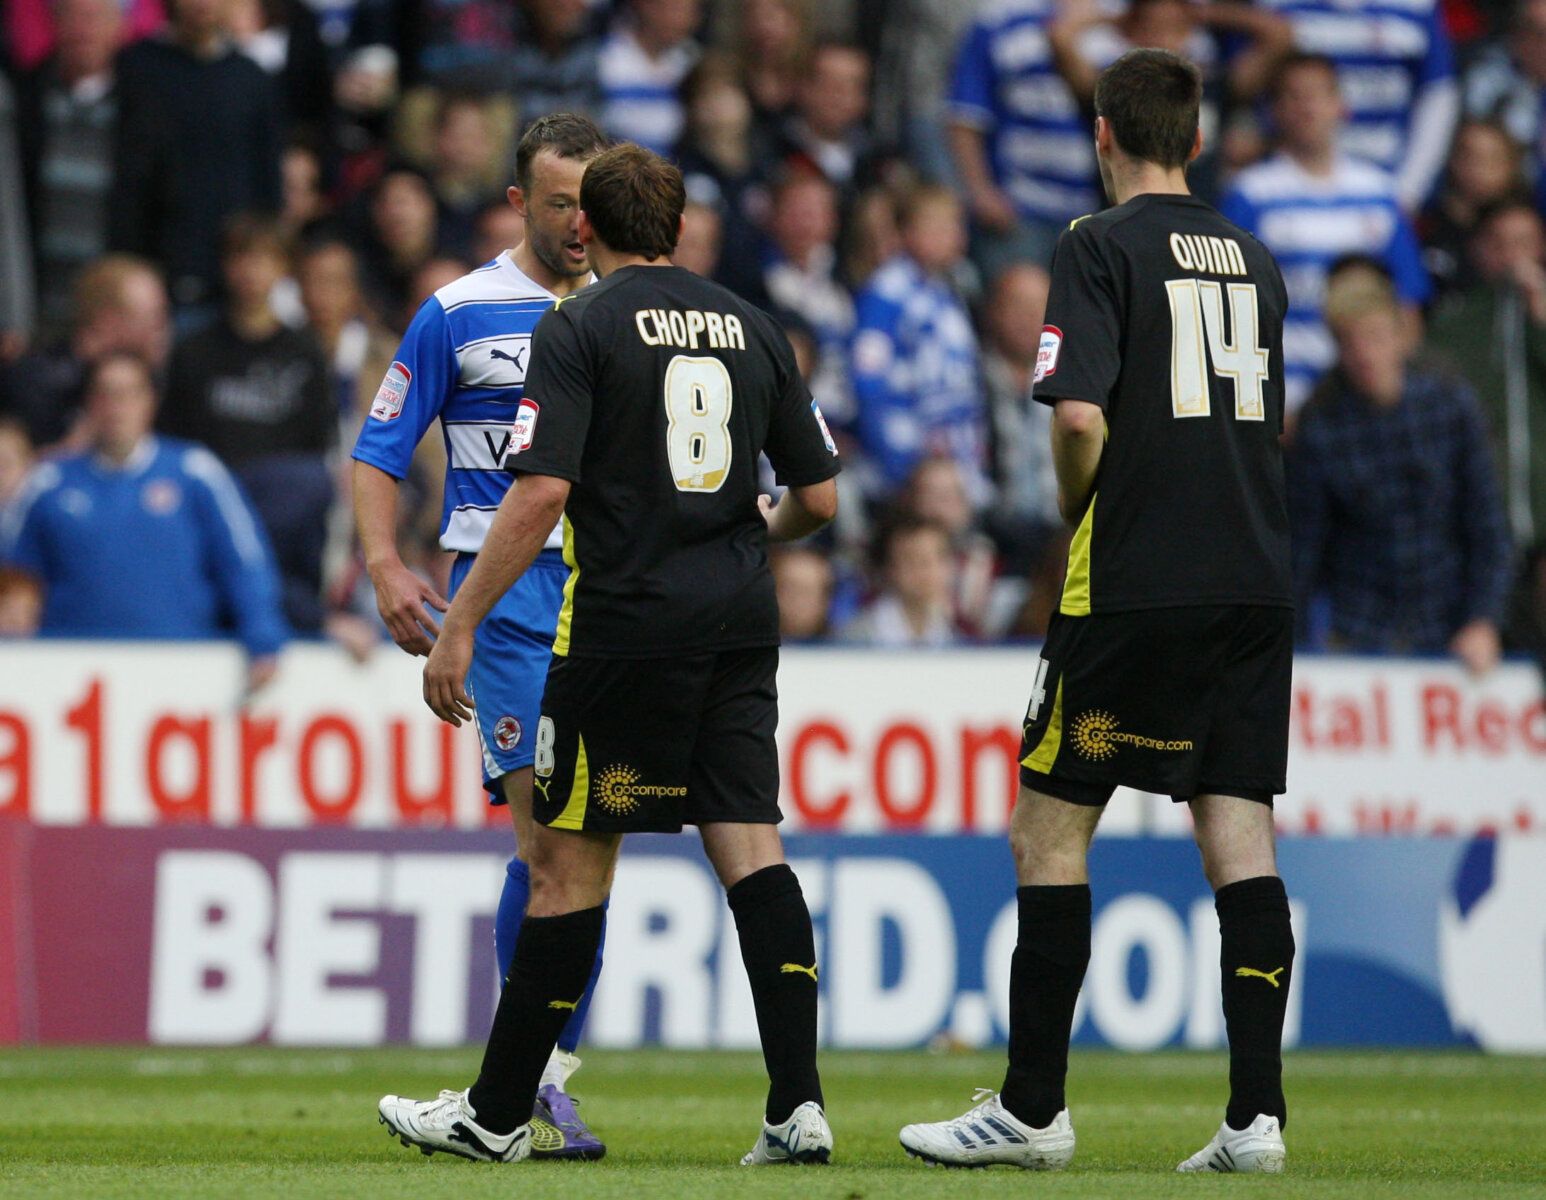 Football - Reading v Cardiff City npower Football League Championship Play-Off Semi Final First Leg  - The Madejski Stadium - 10/11 - 13/5/11 
Reading's Noel Hunt (L) and Cardiff City's Michael Chopra (C) clash during the match 
Mandatory Credit: Action Images / Steven Paston 
Livepic